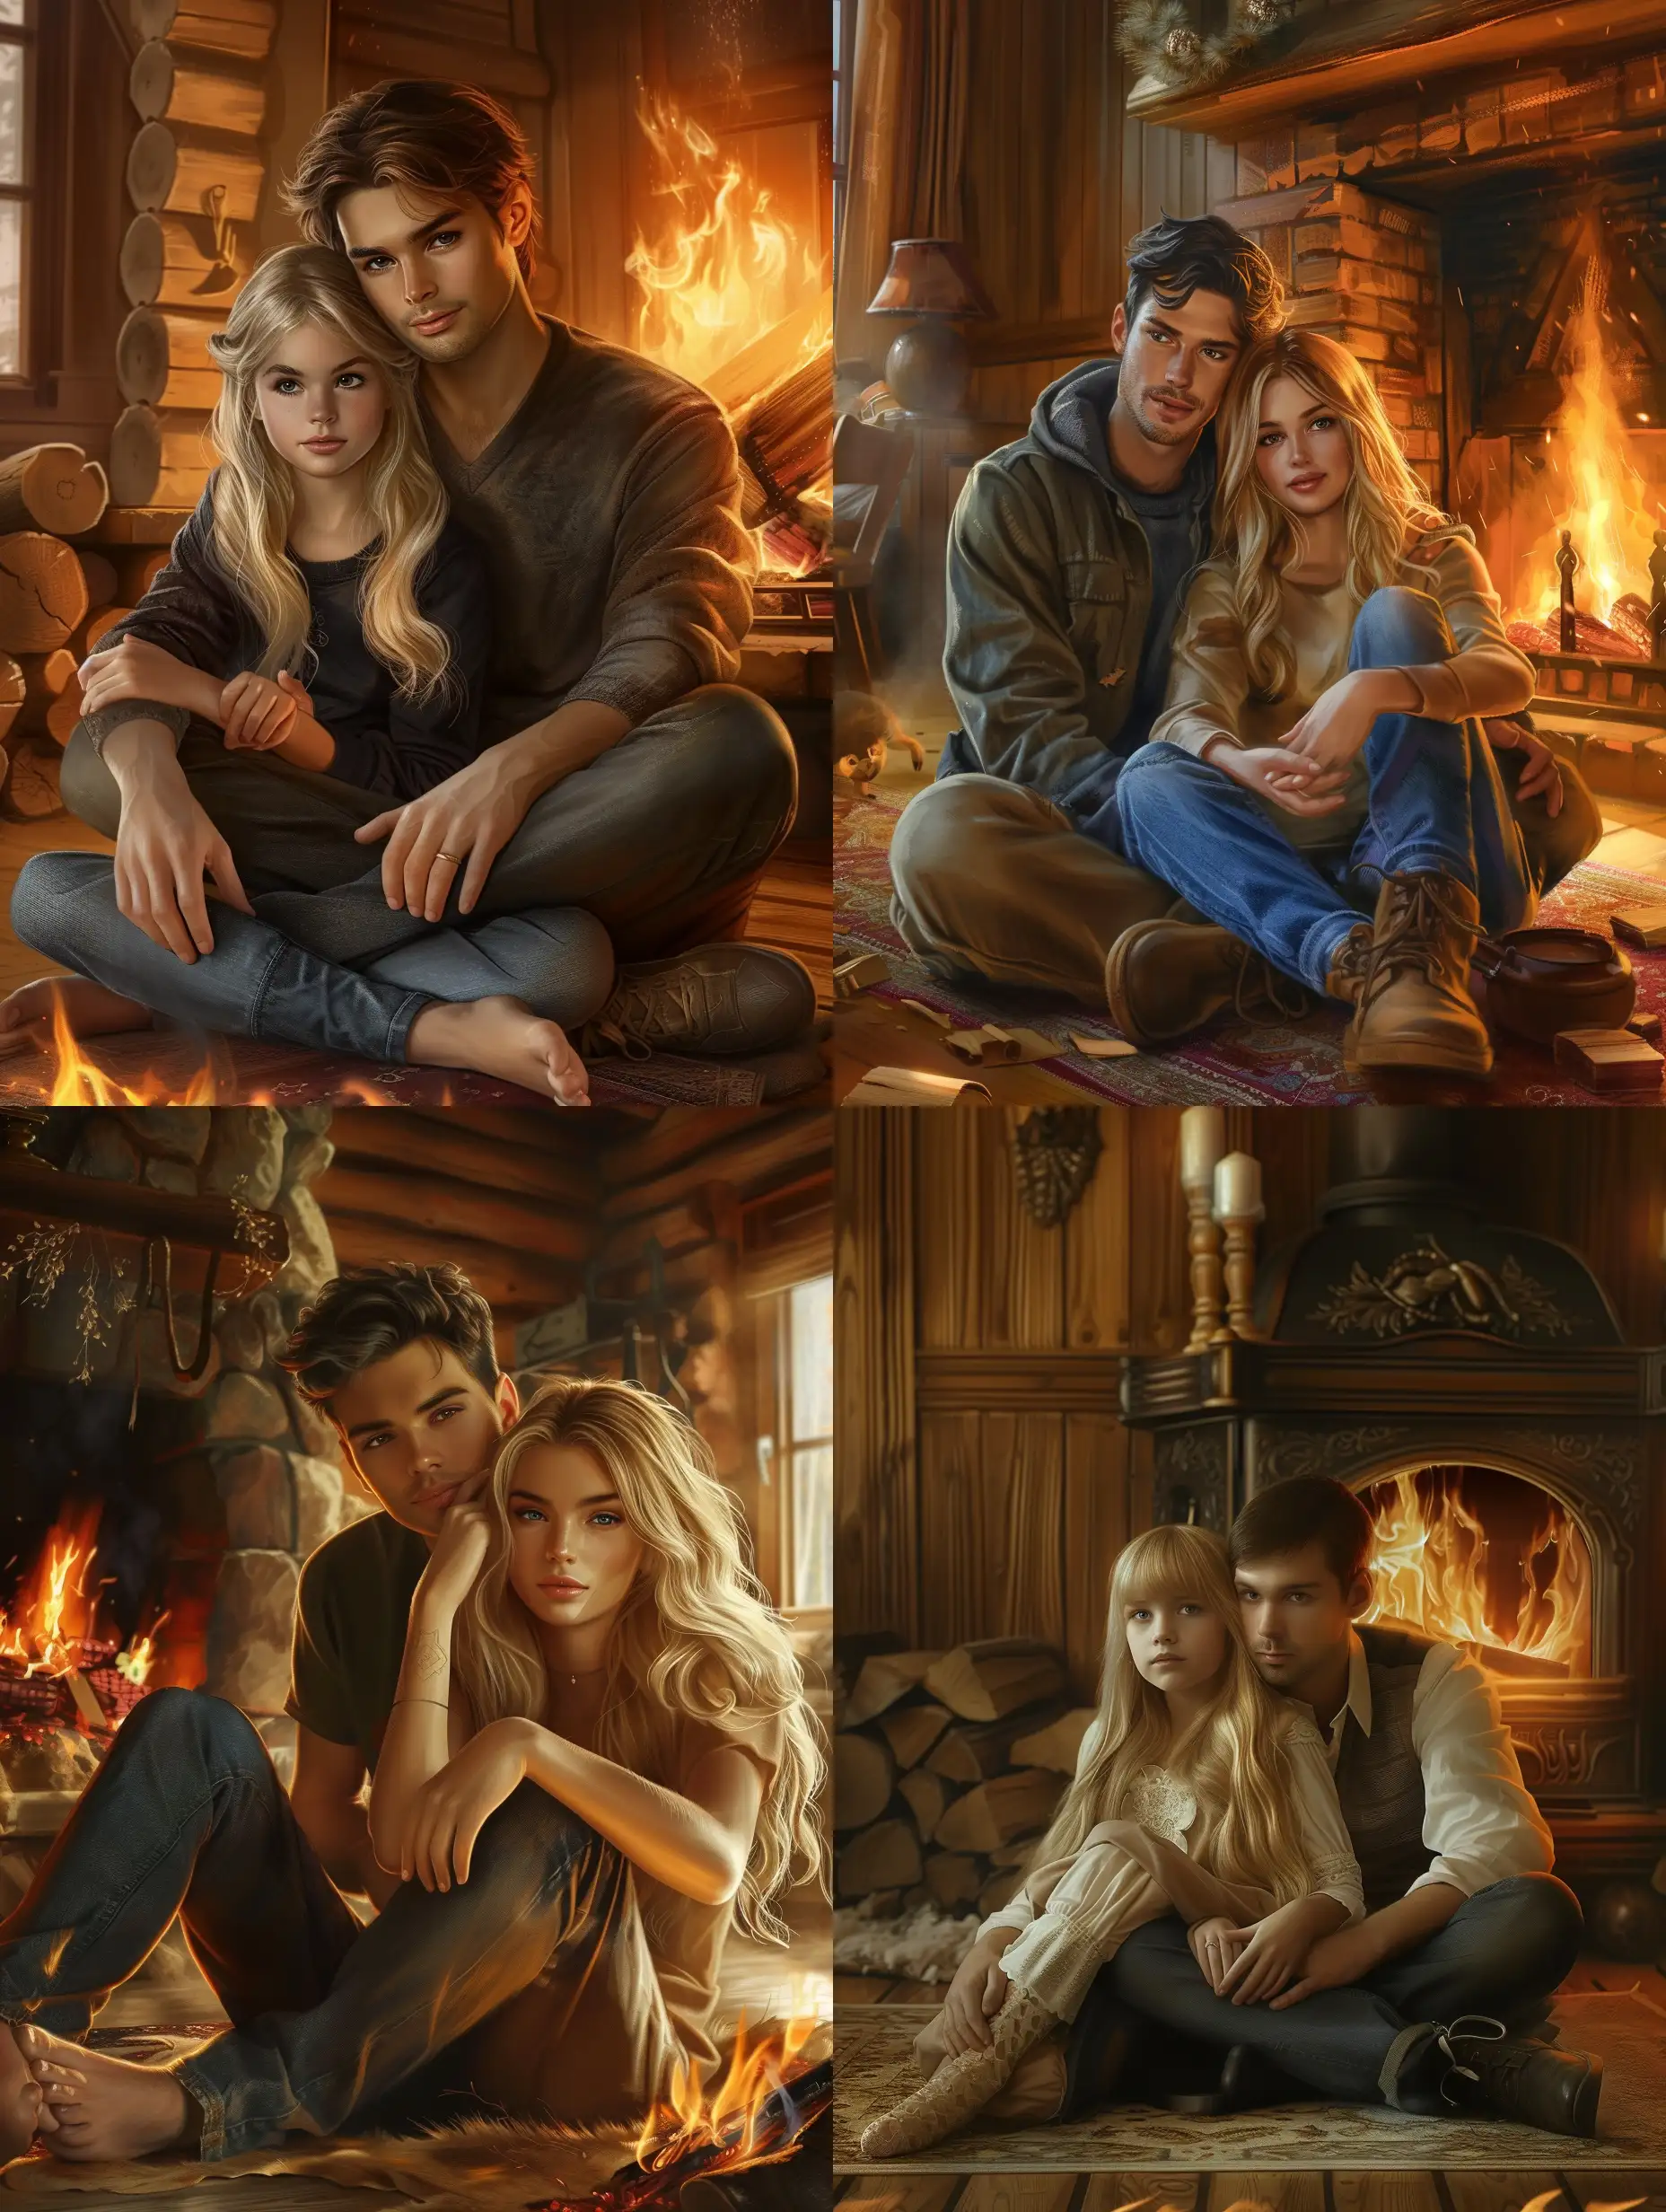 A man and a girl sitting on the floor by a burning fireplace in a cozy romantic atmosphere the girl has beautiful blonde hair faces look into the camera well seen realistic yoto with details 